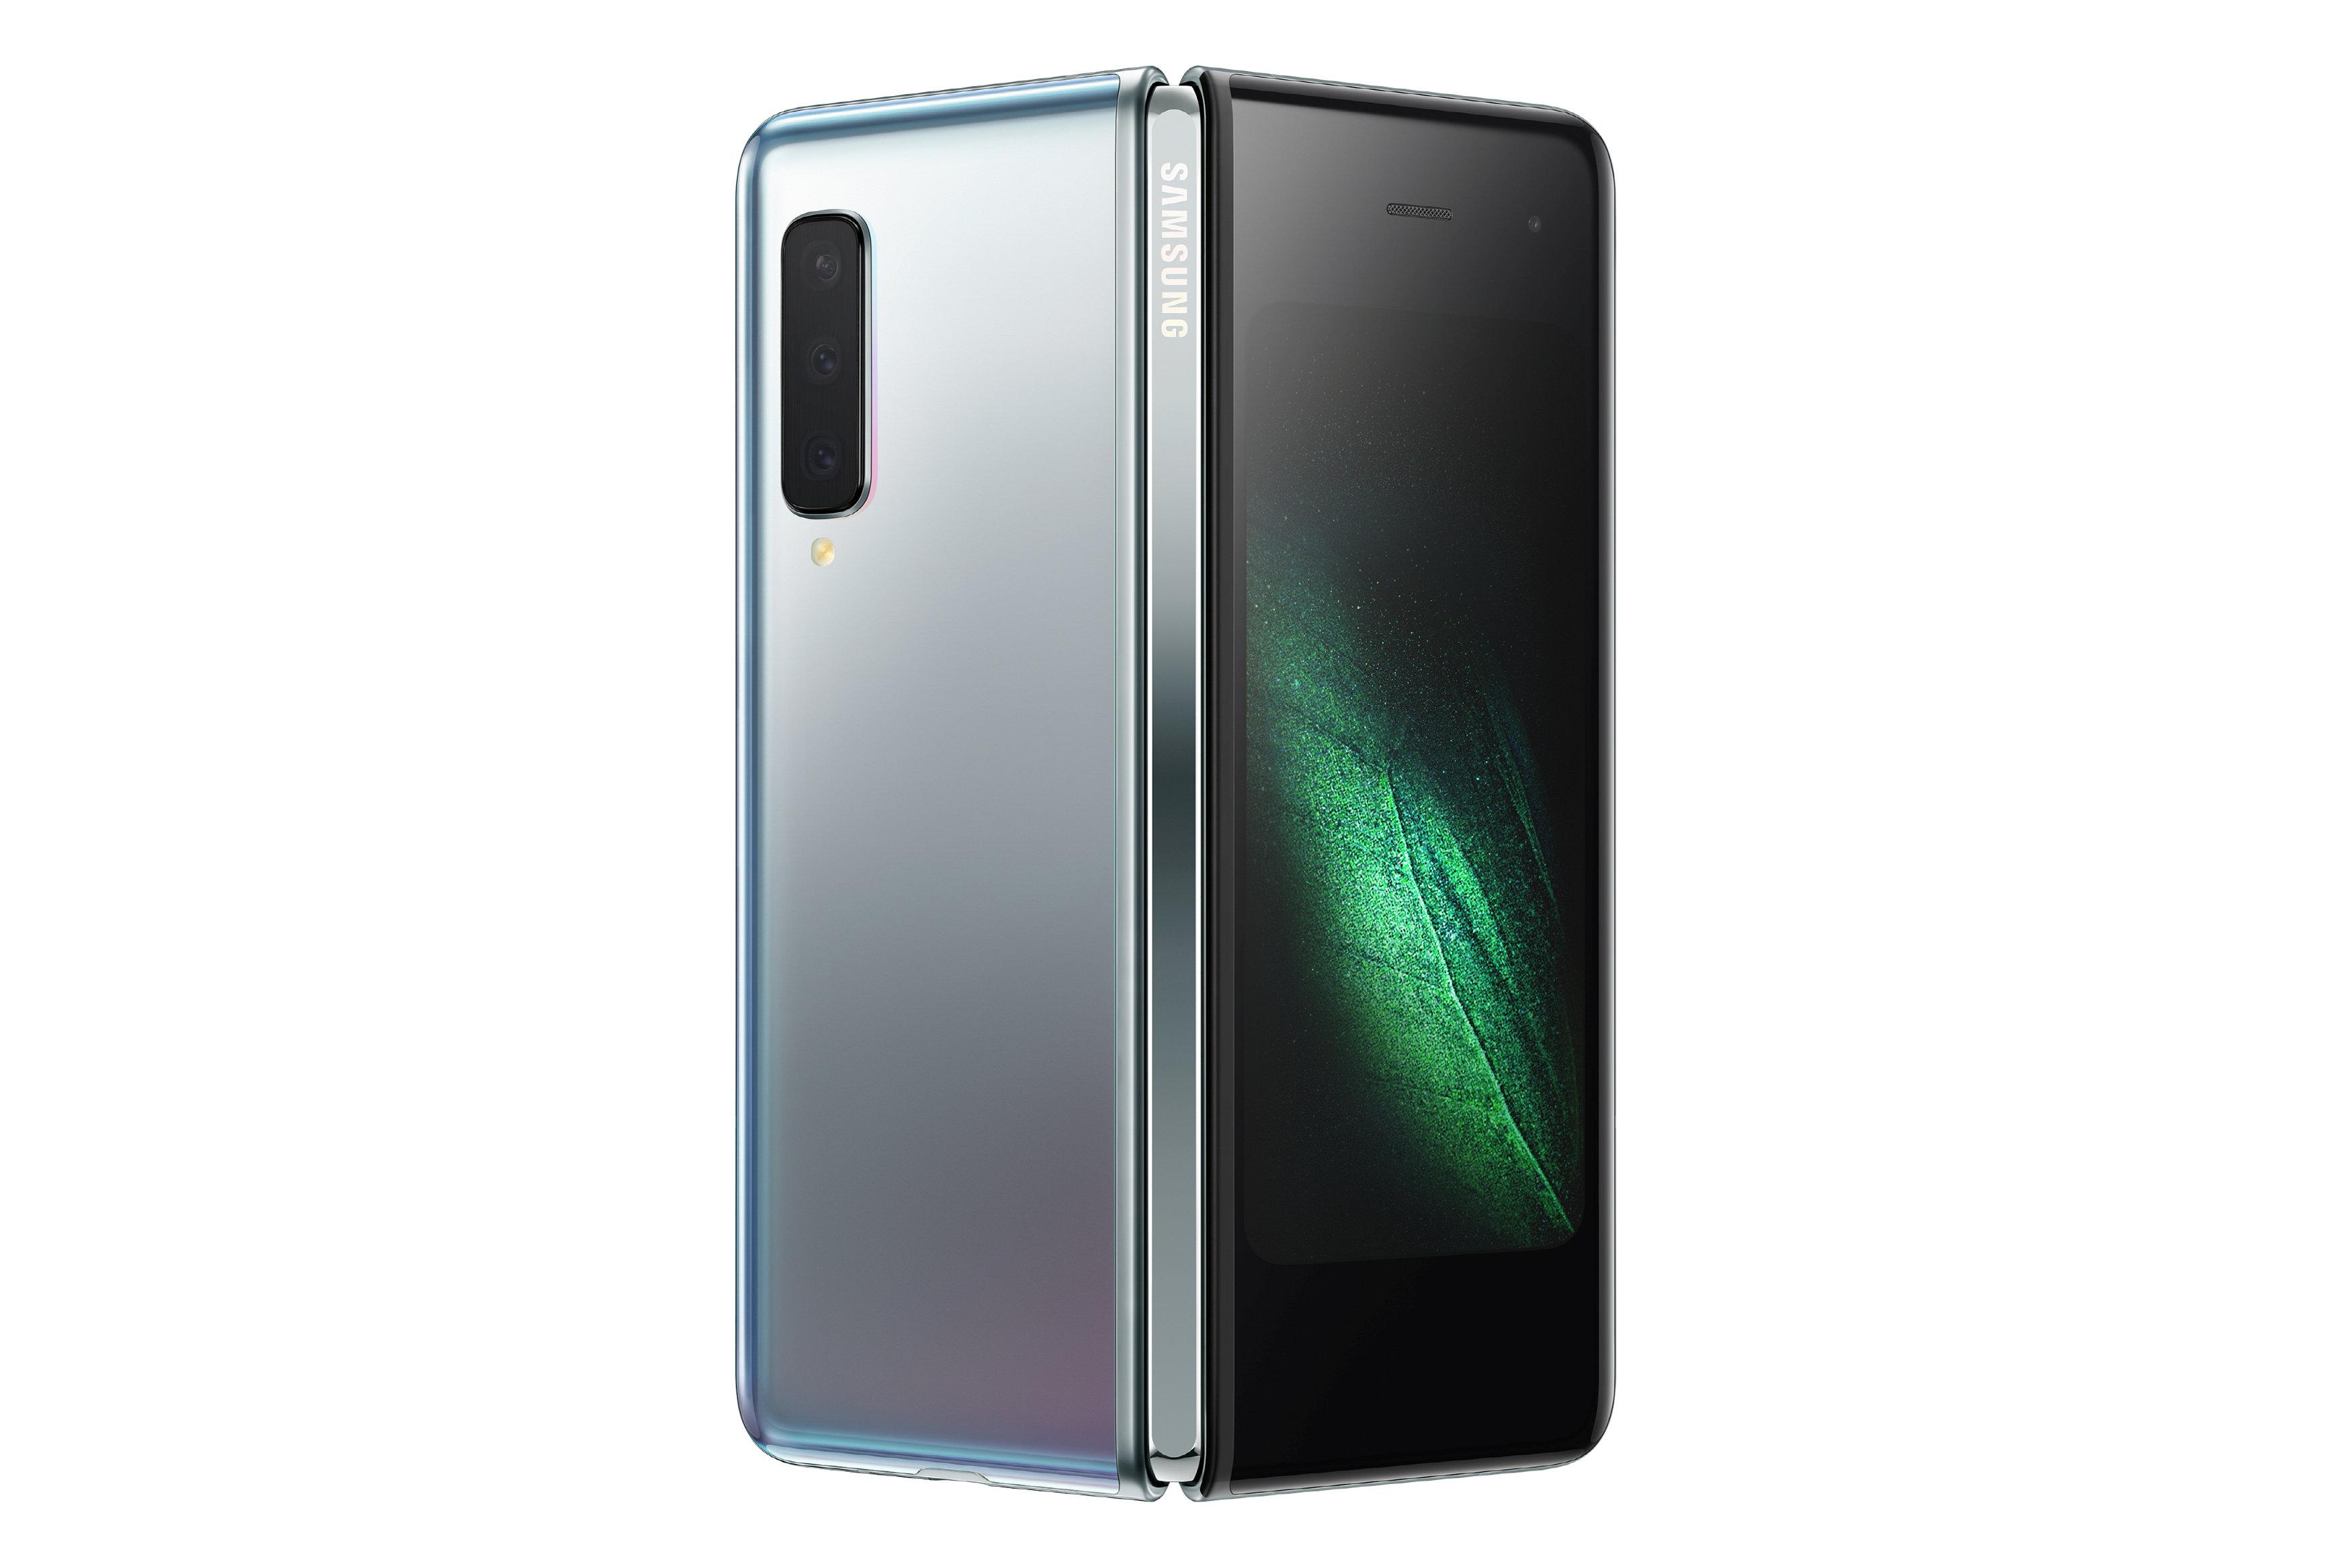 Samsung announces Galaxy Fold phone with apps from Facebook, Google